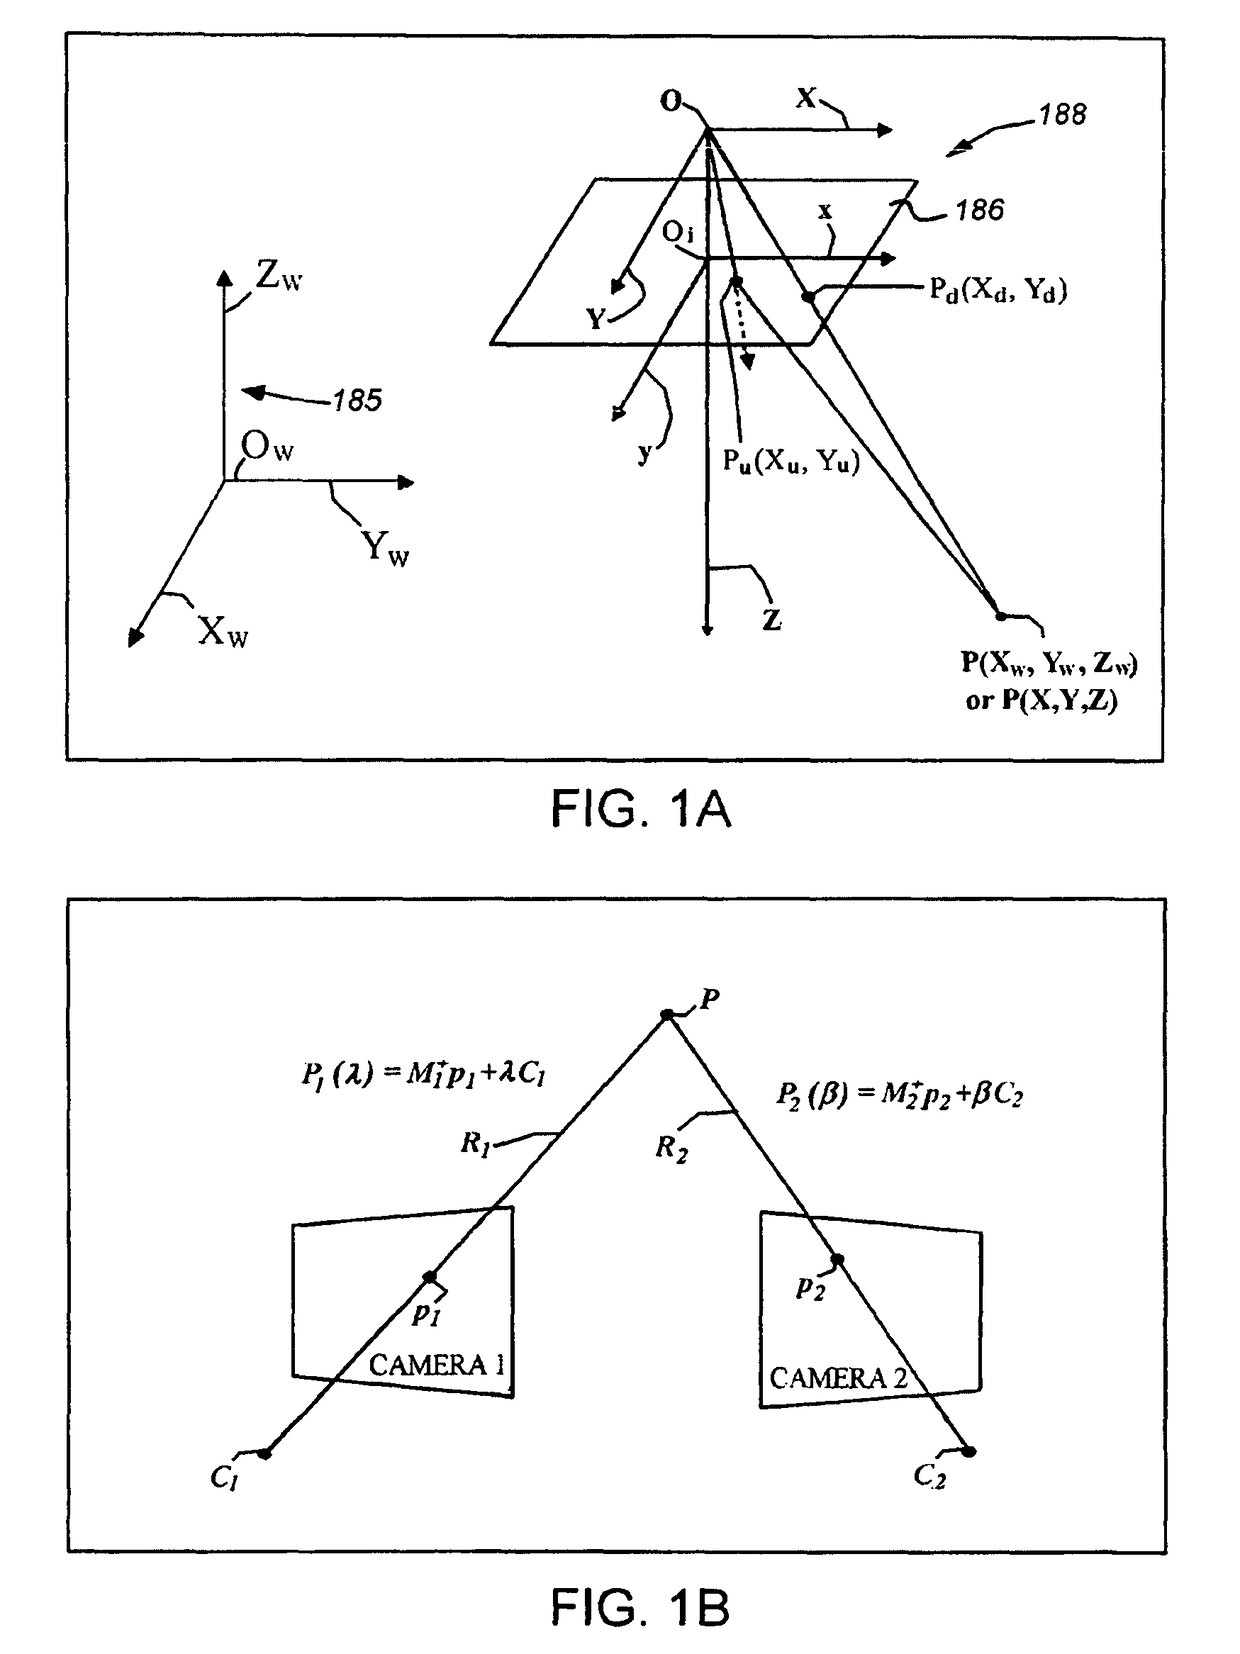 System and method for validating camera calibration in a vision system